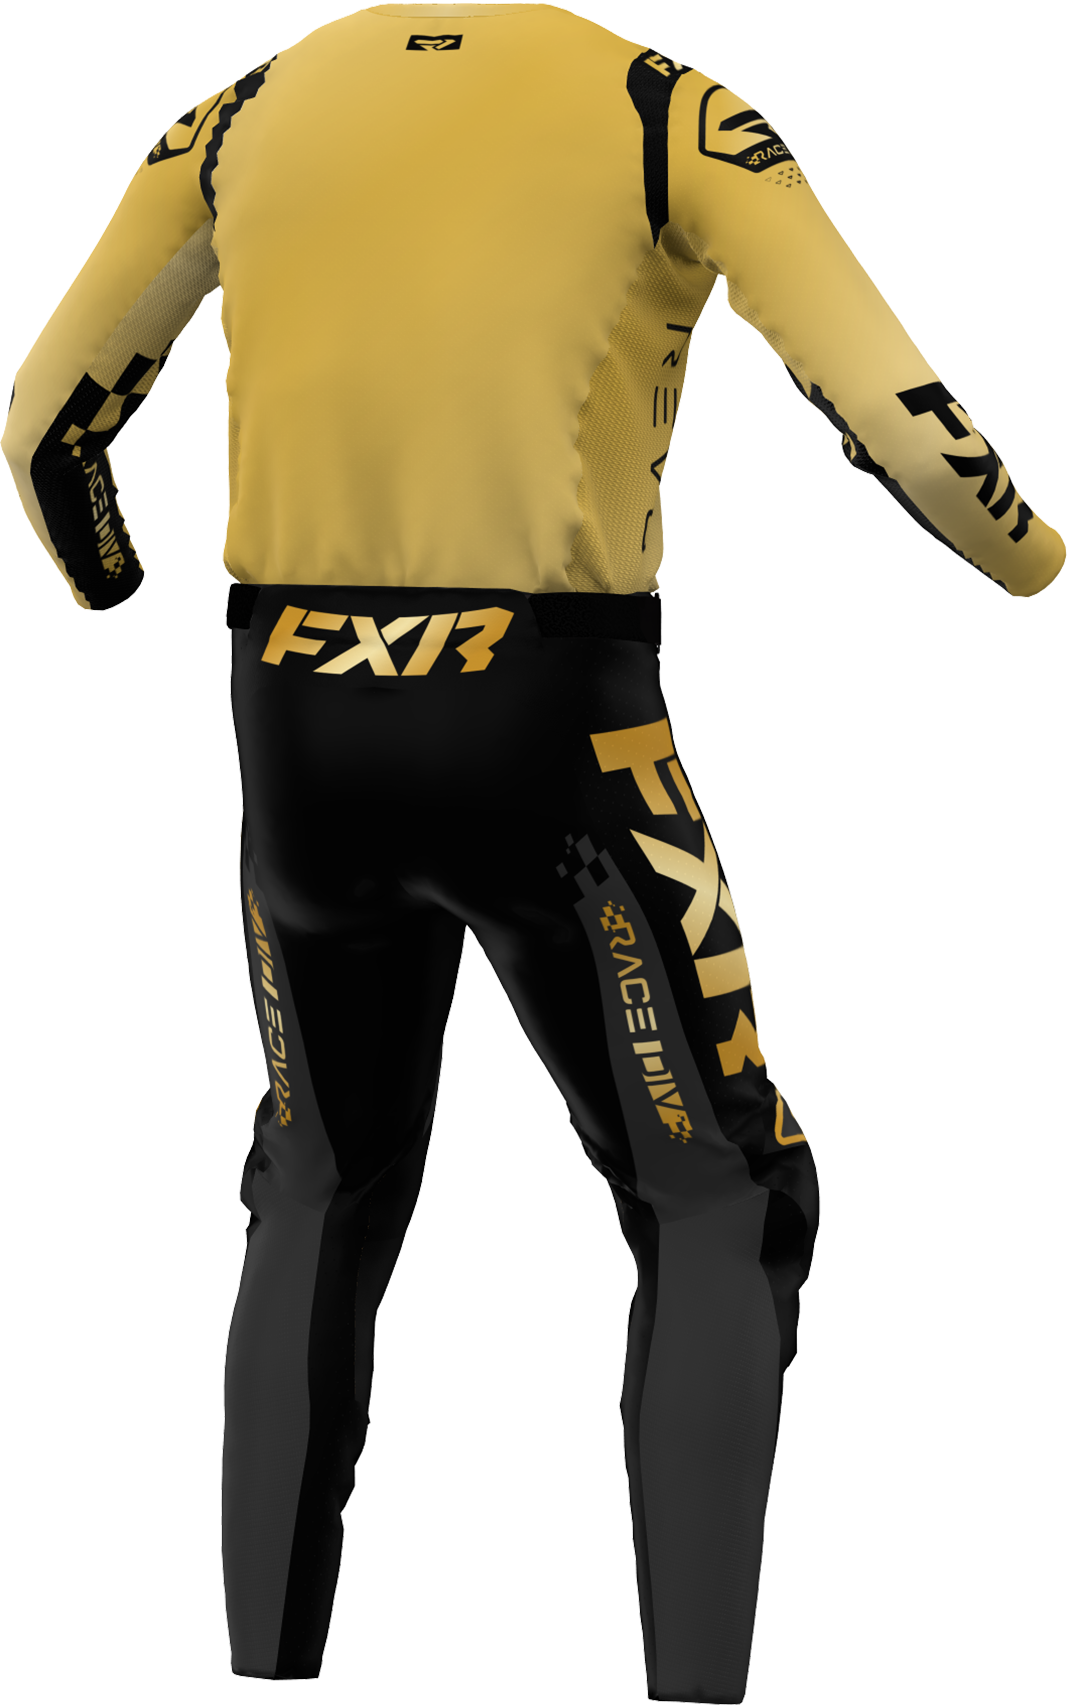 A 3D image of FXR's Revo Legend MX Jersey and Pant in Solid Gold colorway